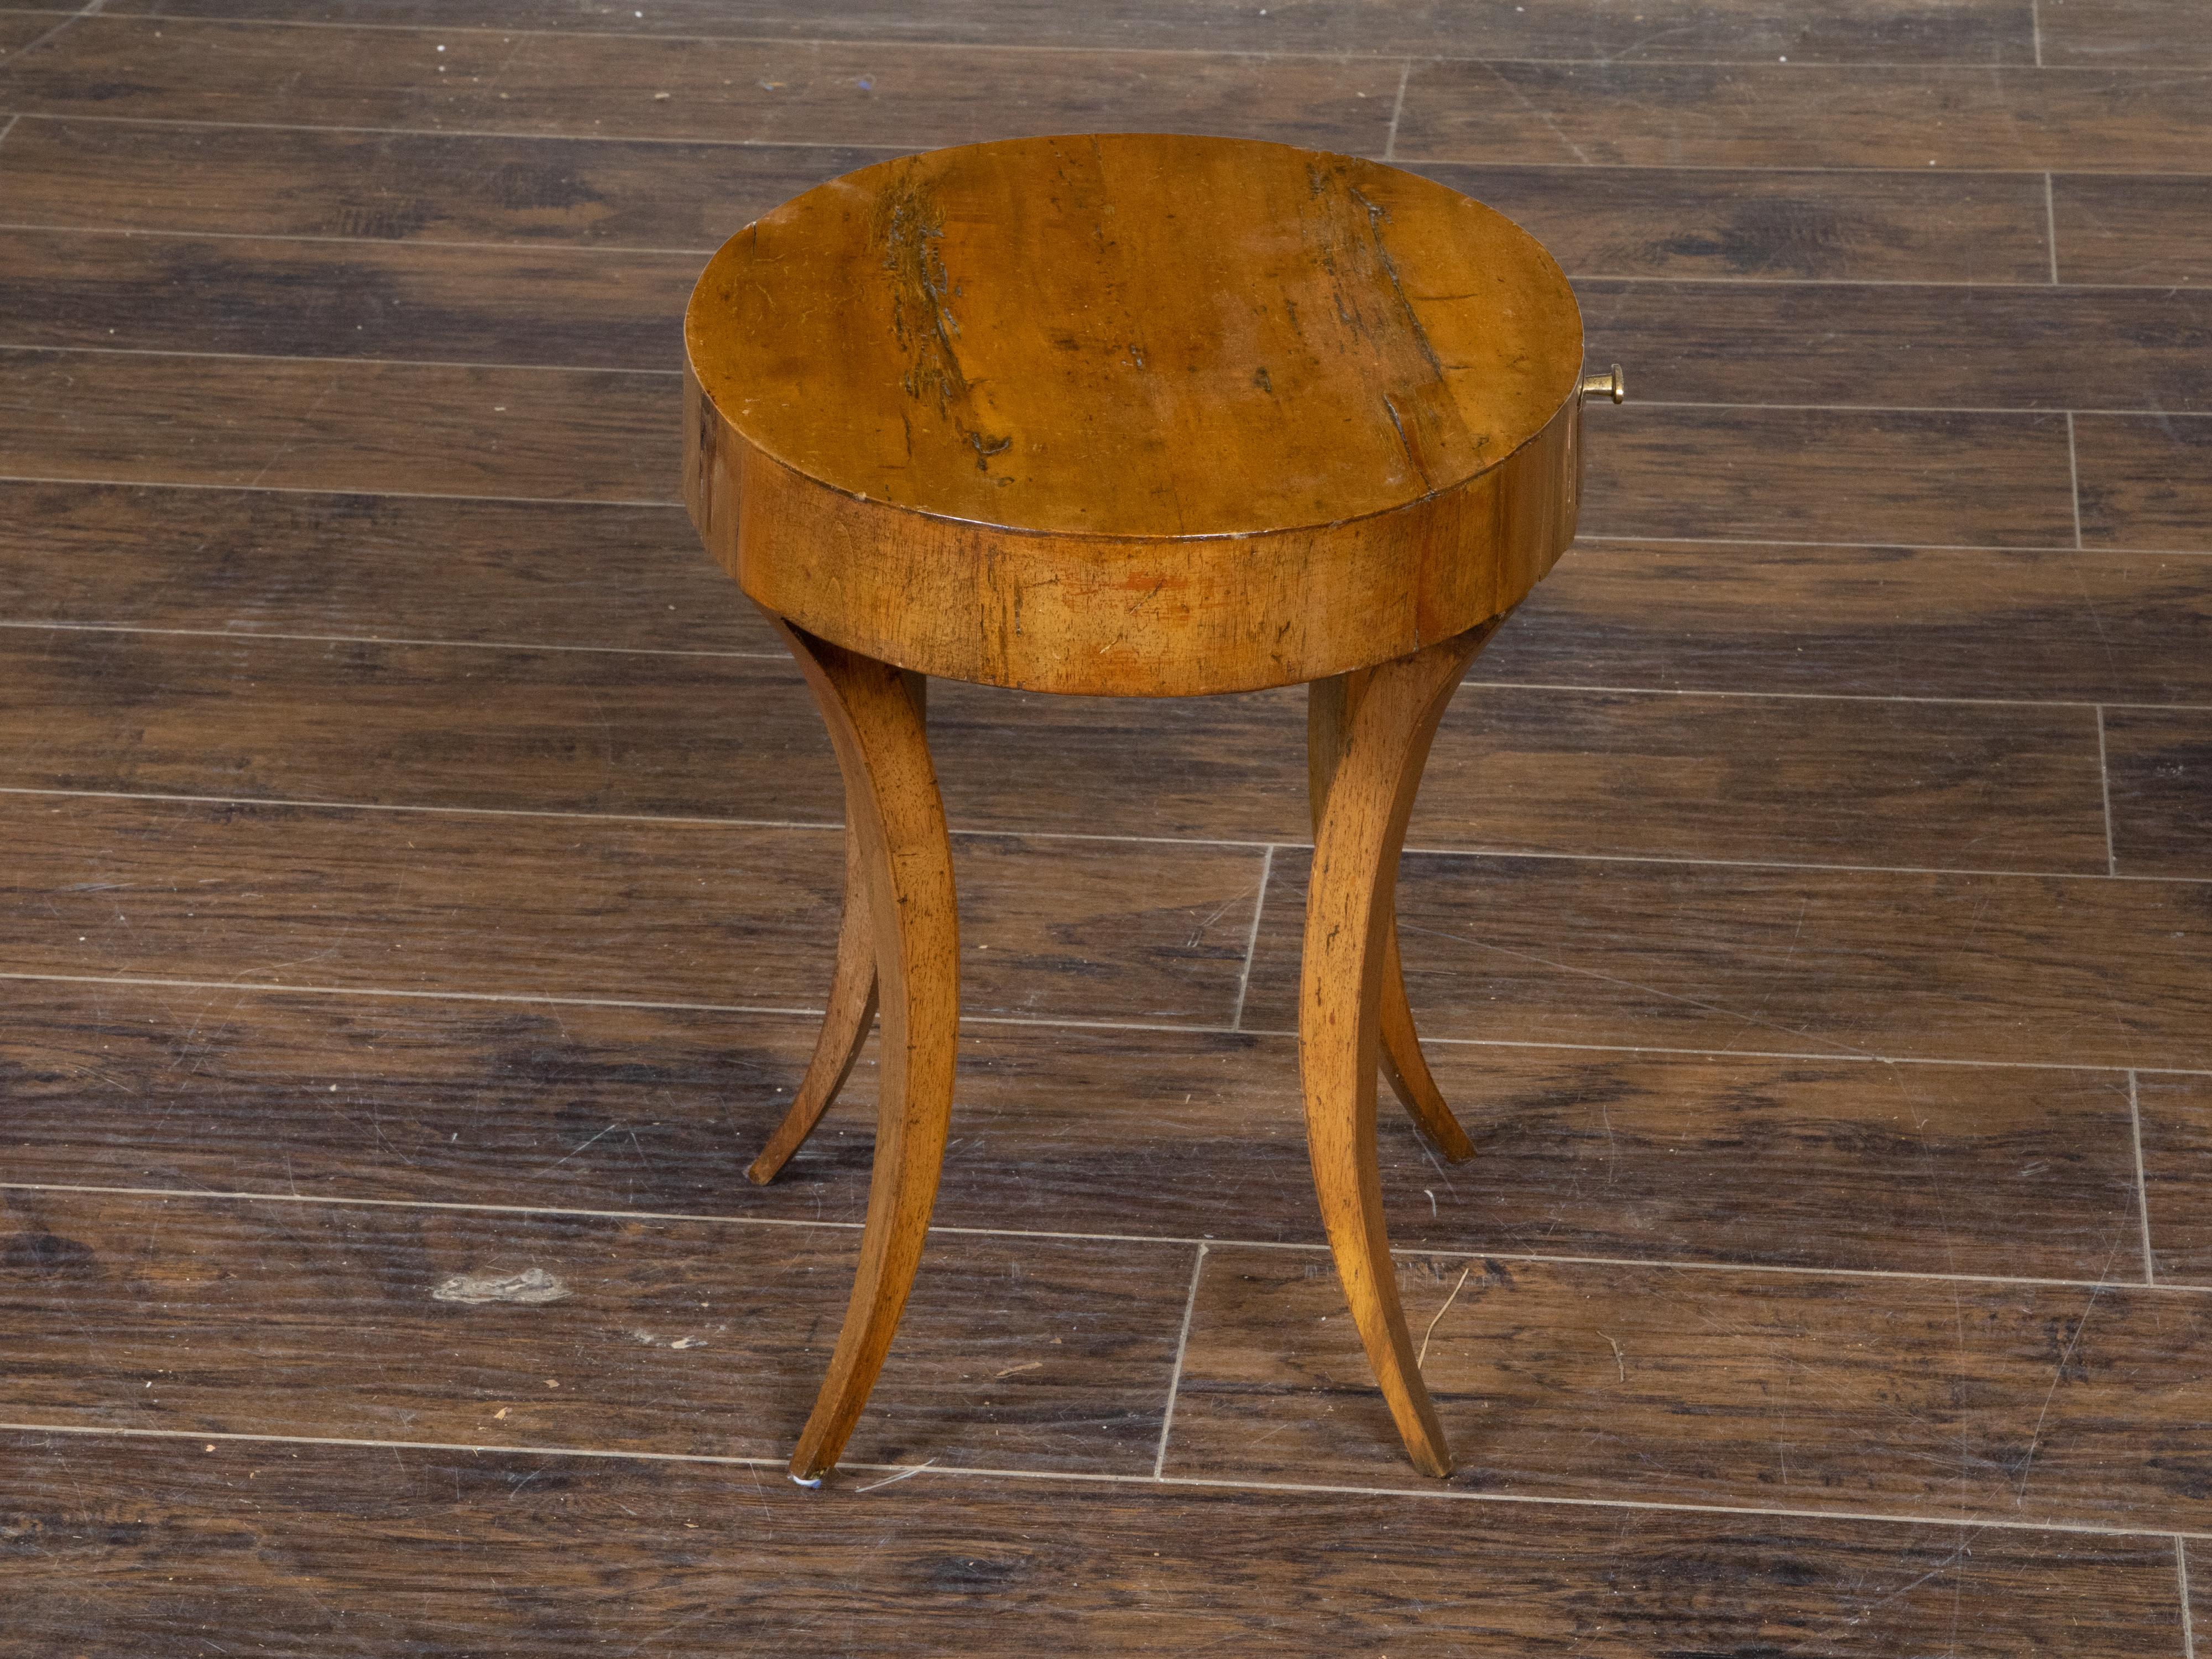 Italian Neoclassical 1810s Walnut Table with Oval Top, Drawer and Saber Legs For Sale 1